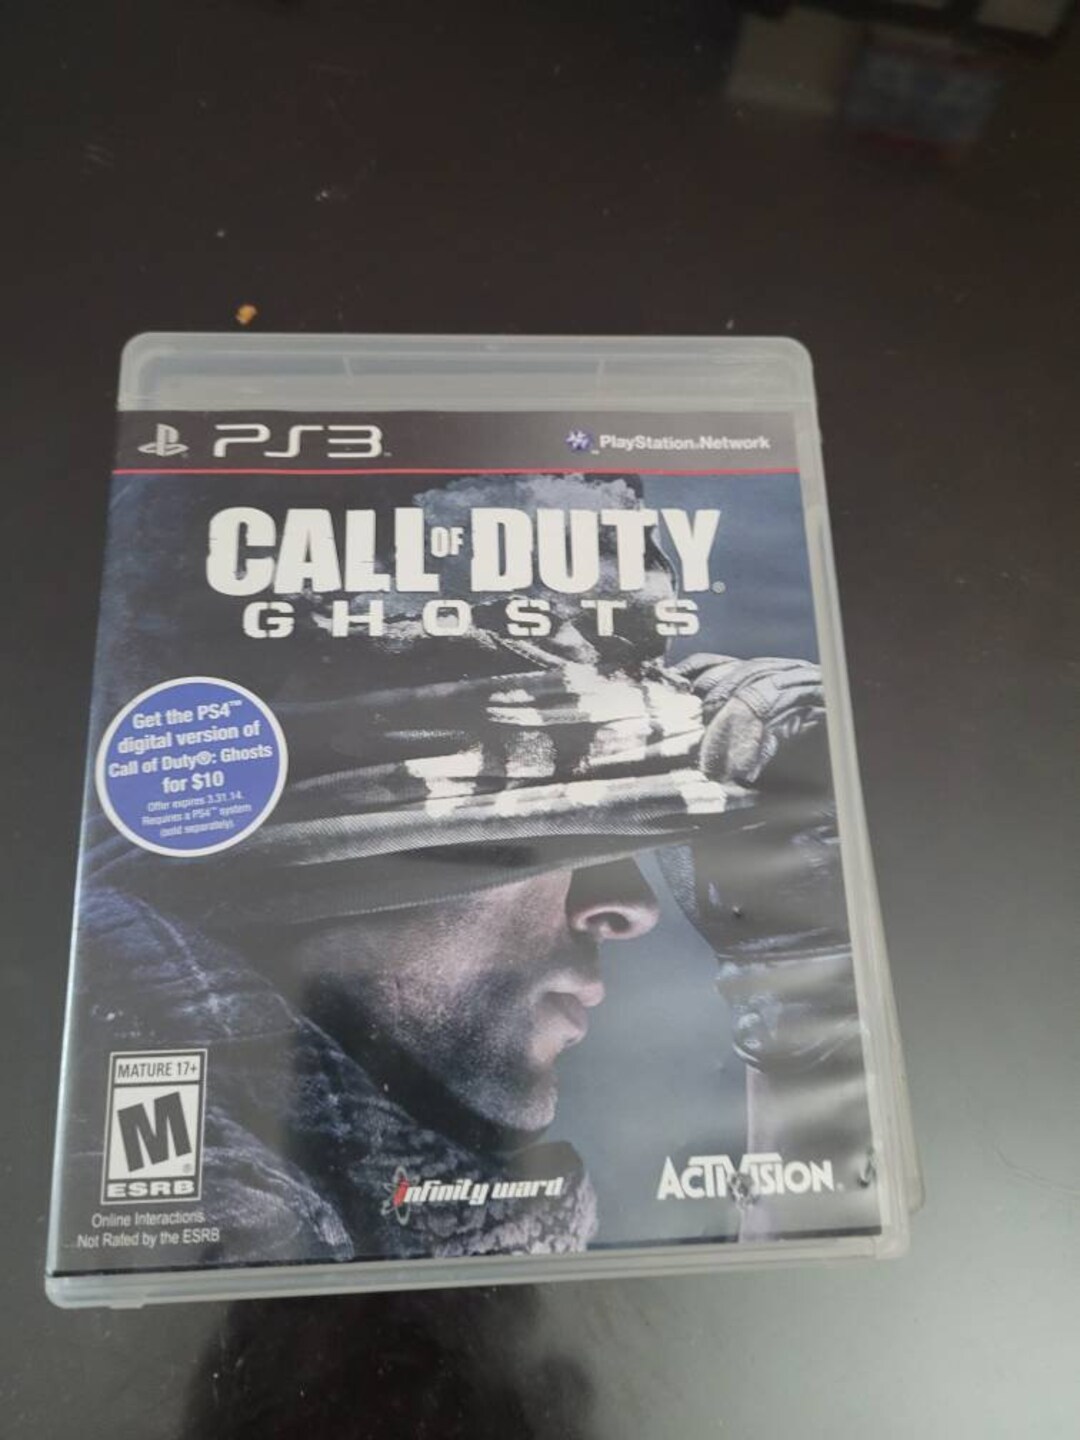 Call of Duty Ghosts Full Game Download Code Valid on Xbox 360 for